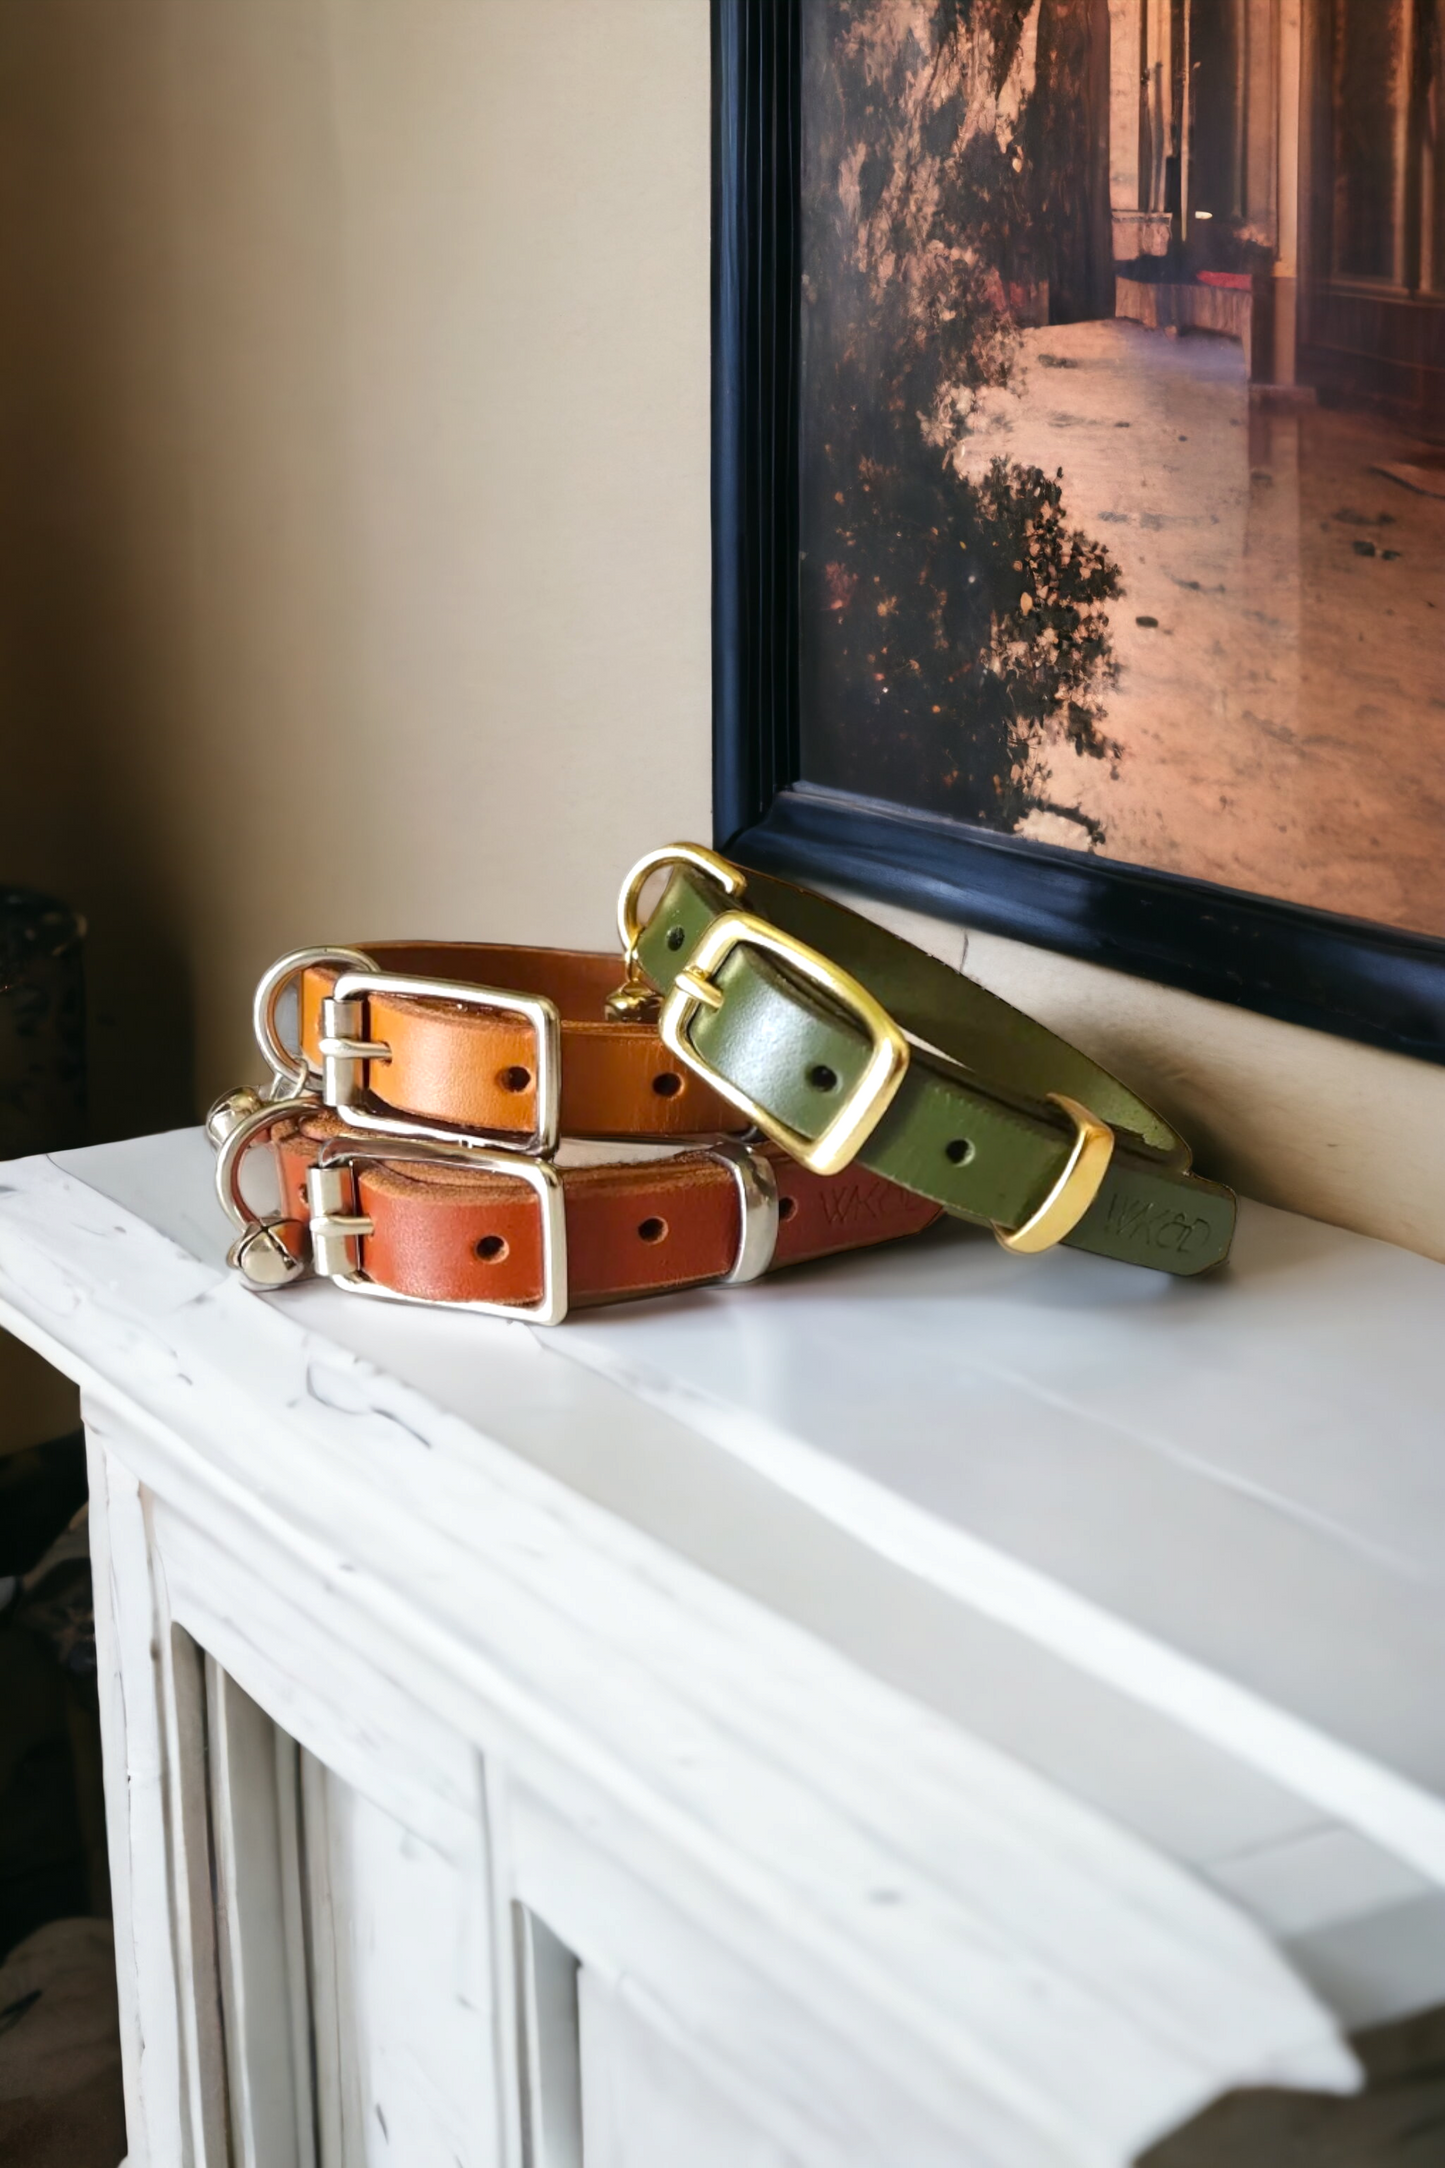 Leather Cat collars with bell